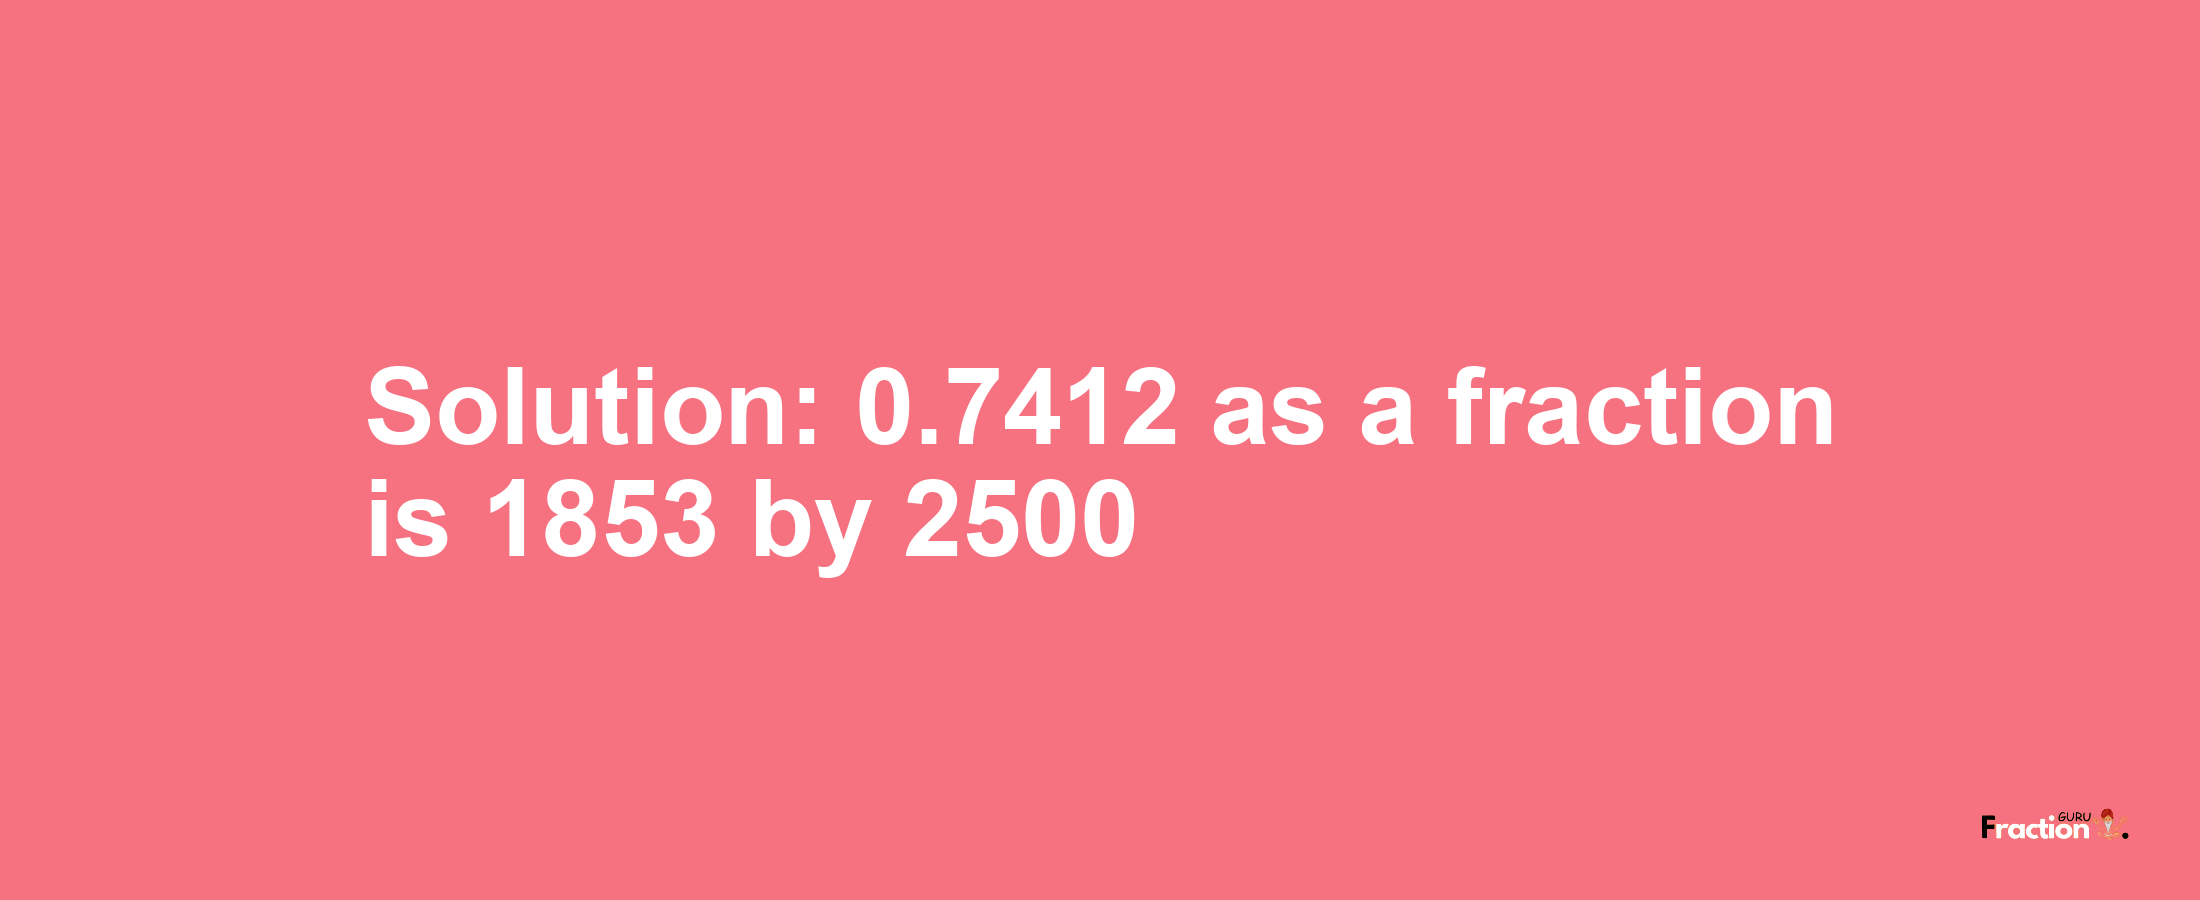 Solution:0.7412 as a fraction is 1853/2500